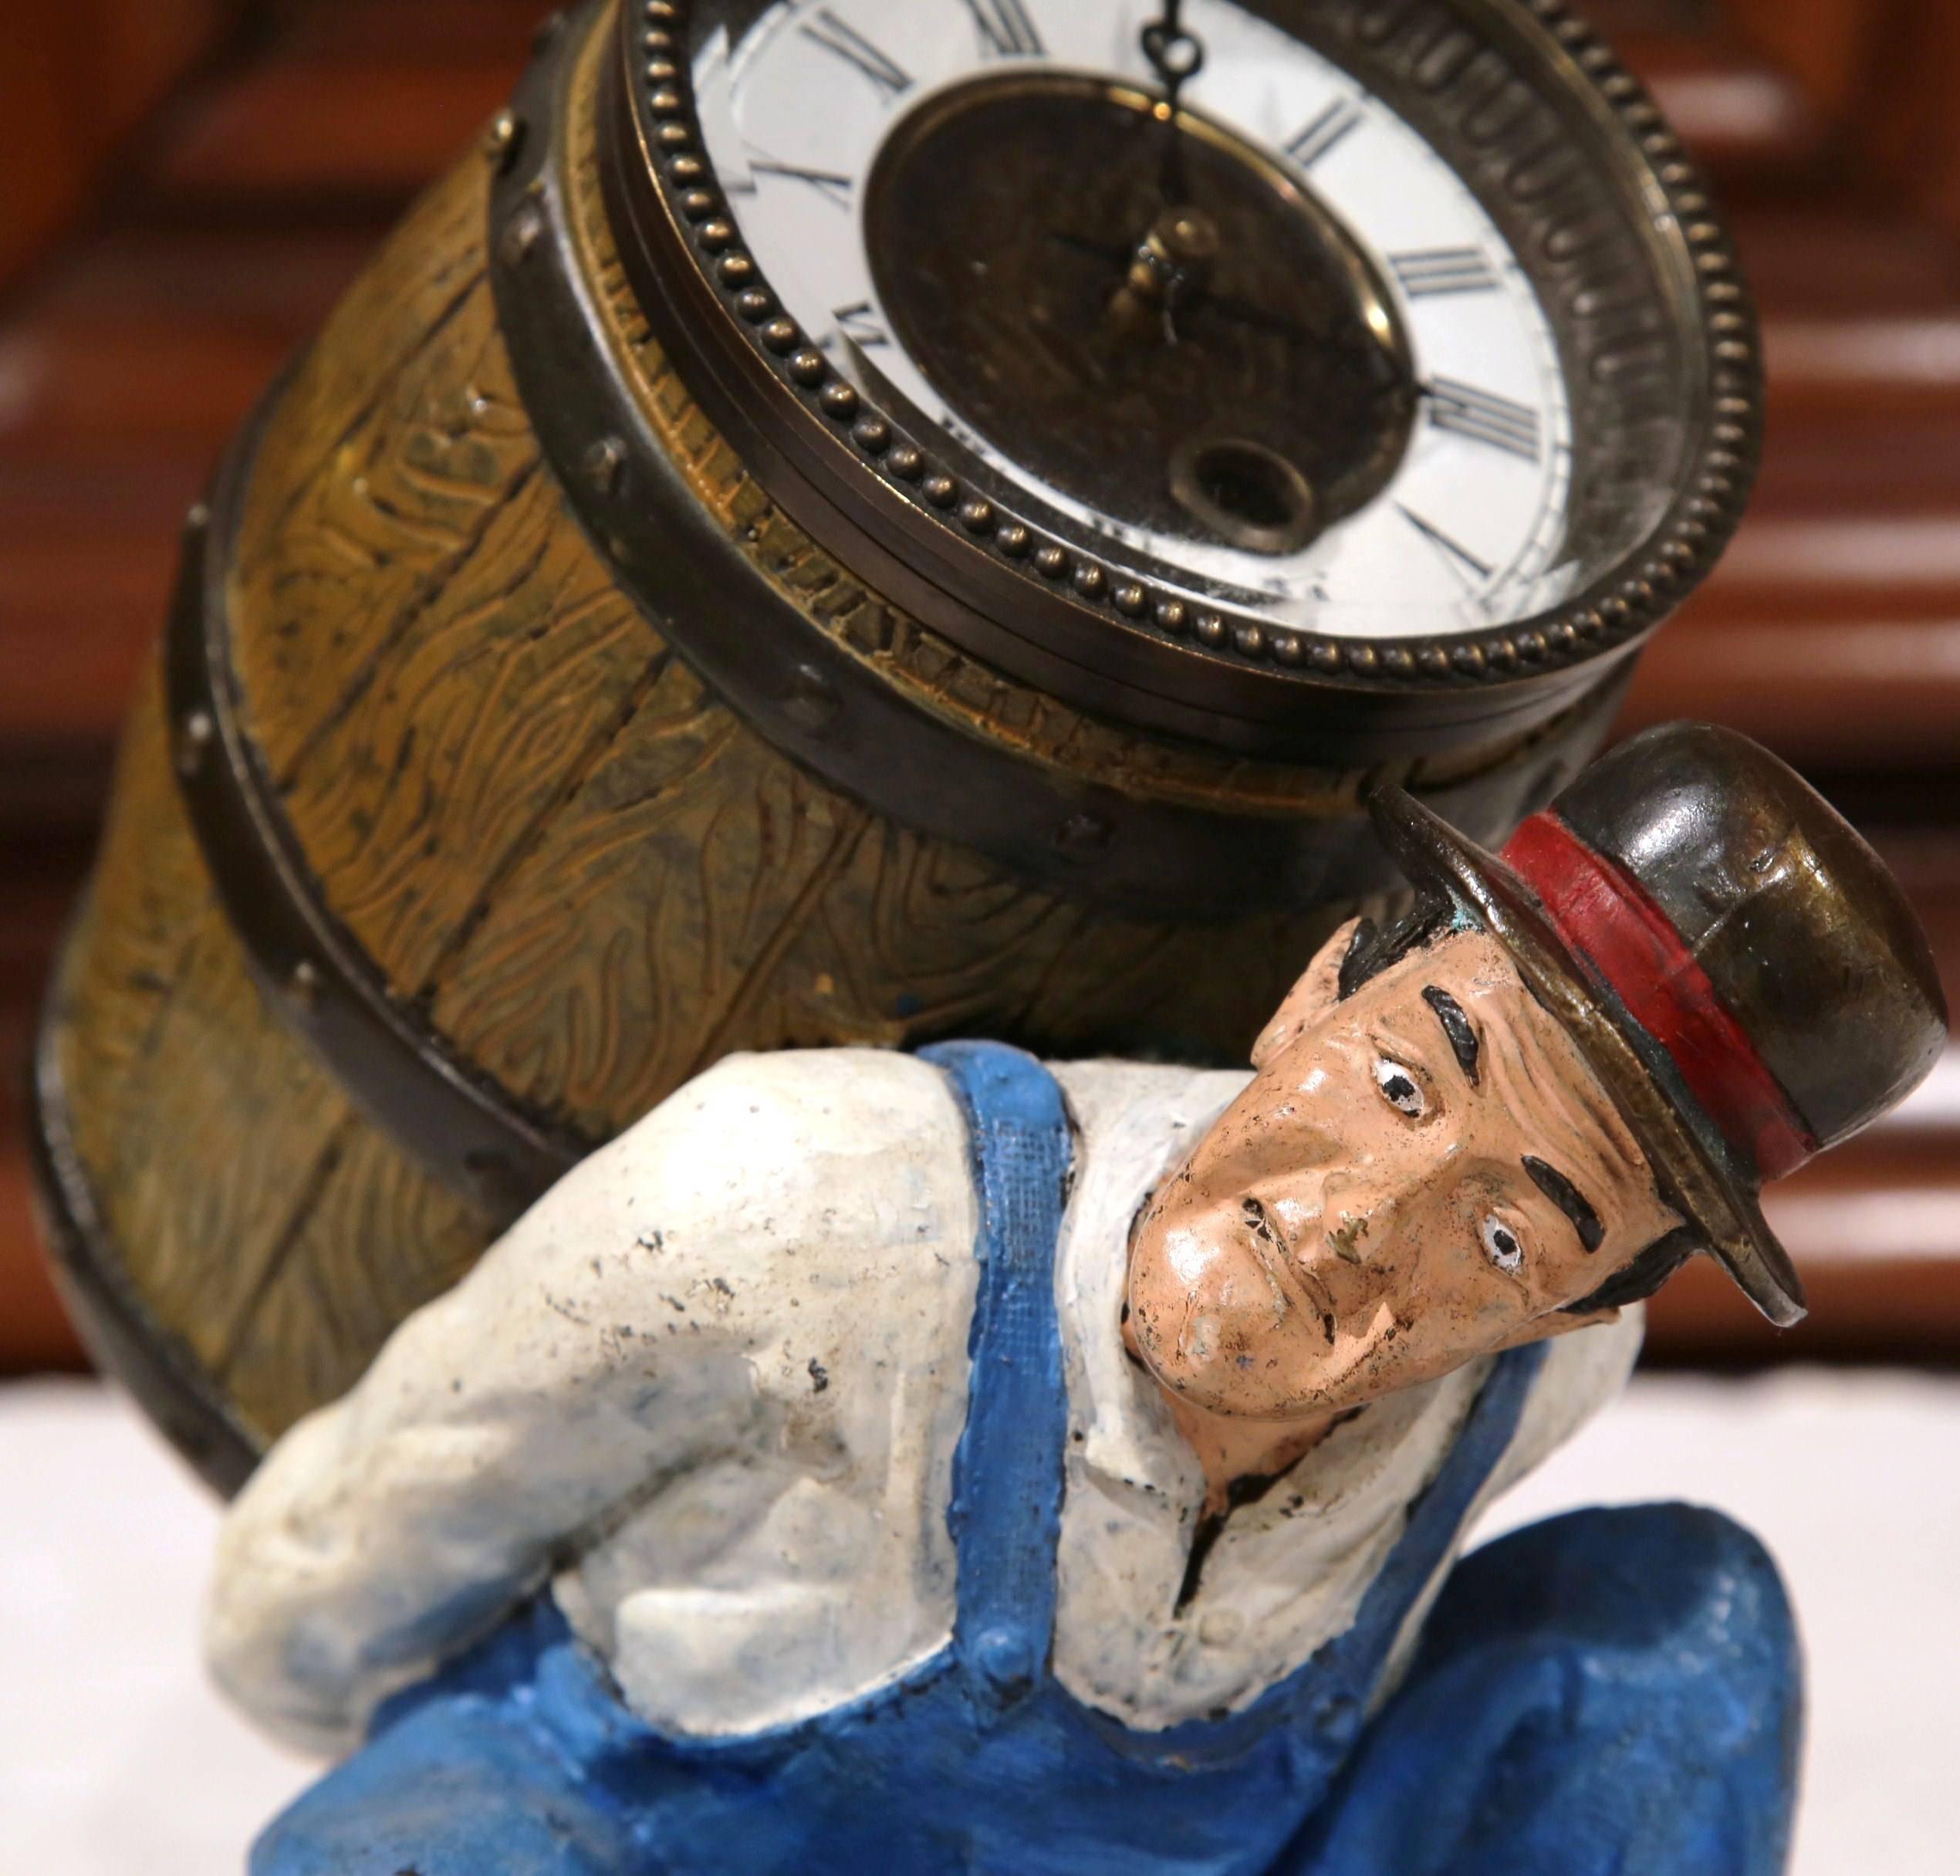 Decorate a desk or bookshelf with this interesting bronze and painted table clock. Crafted, circa 1900, the sculpture depicts an expressive wine maker holding a barrel with a clock inside. The clock mechanism is in excellent working order and has a